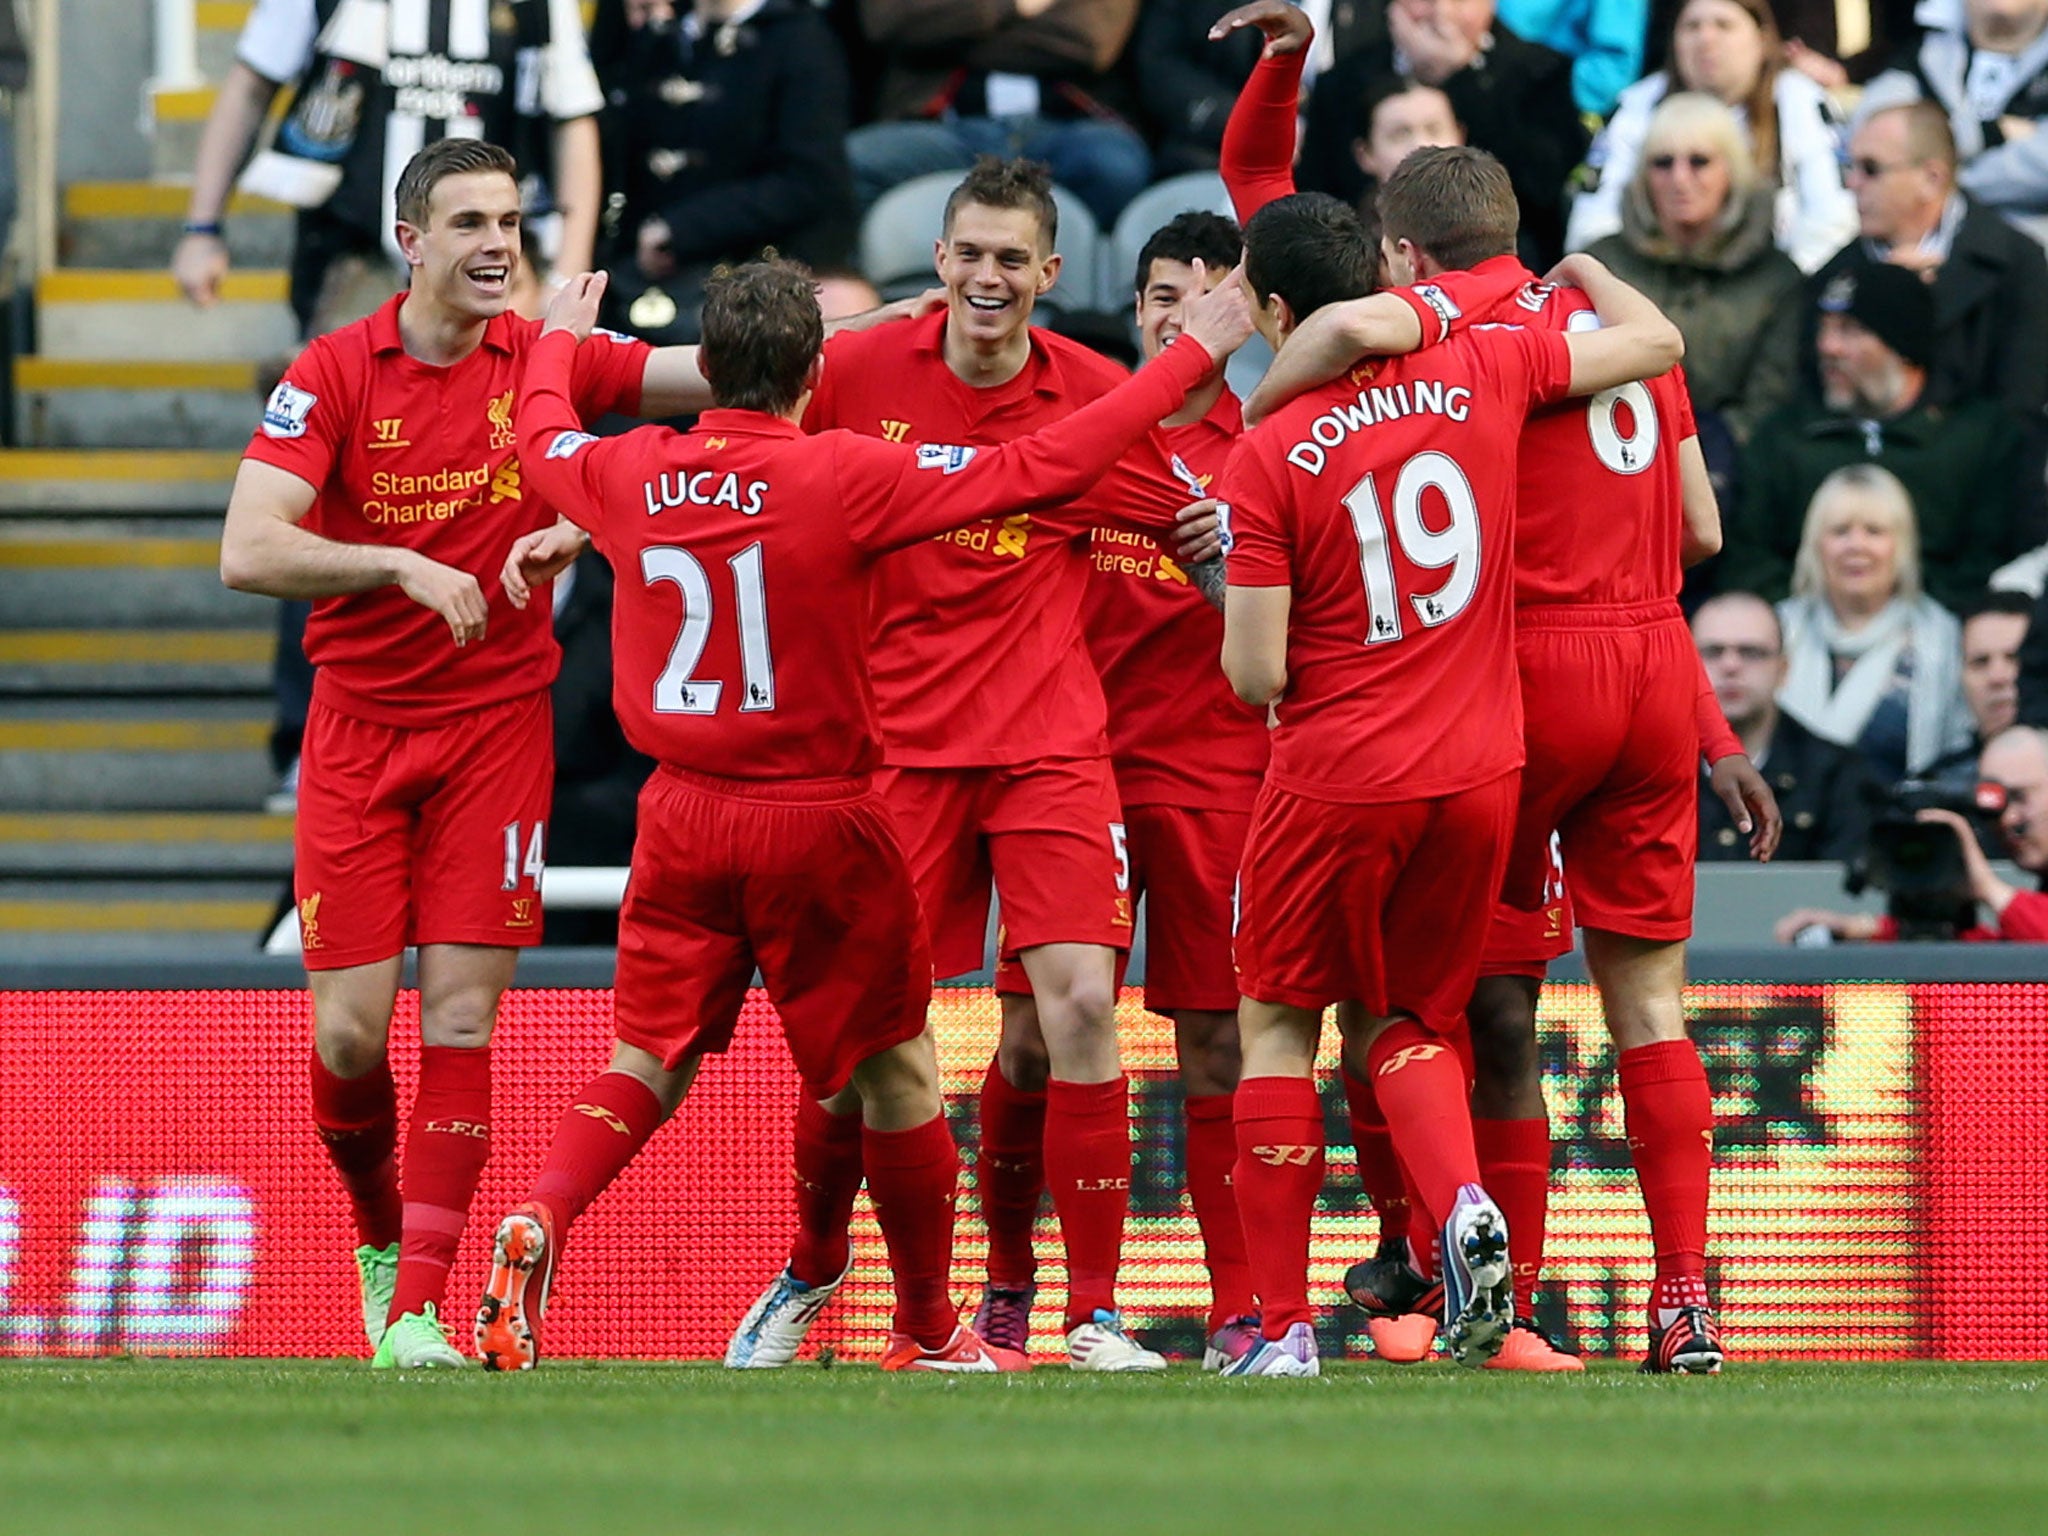 Liverpool's Danish defender Daniel Agger (C) celebrates with teammates after scoring a goal